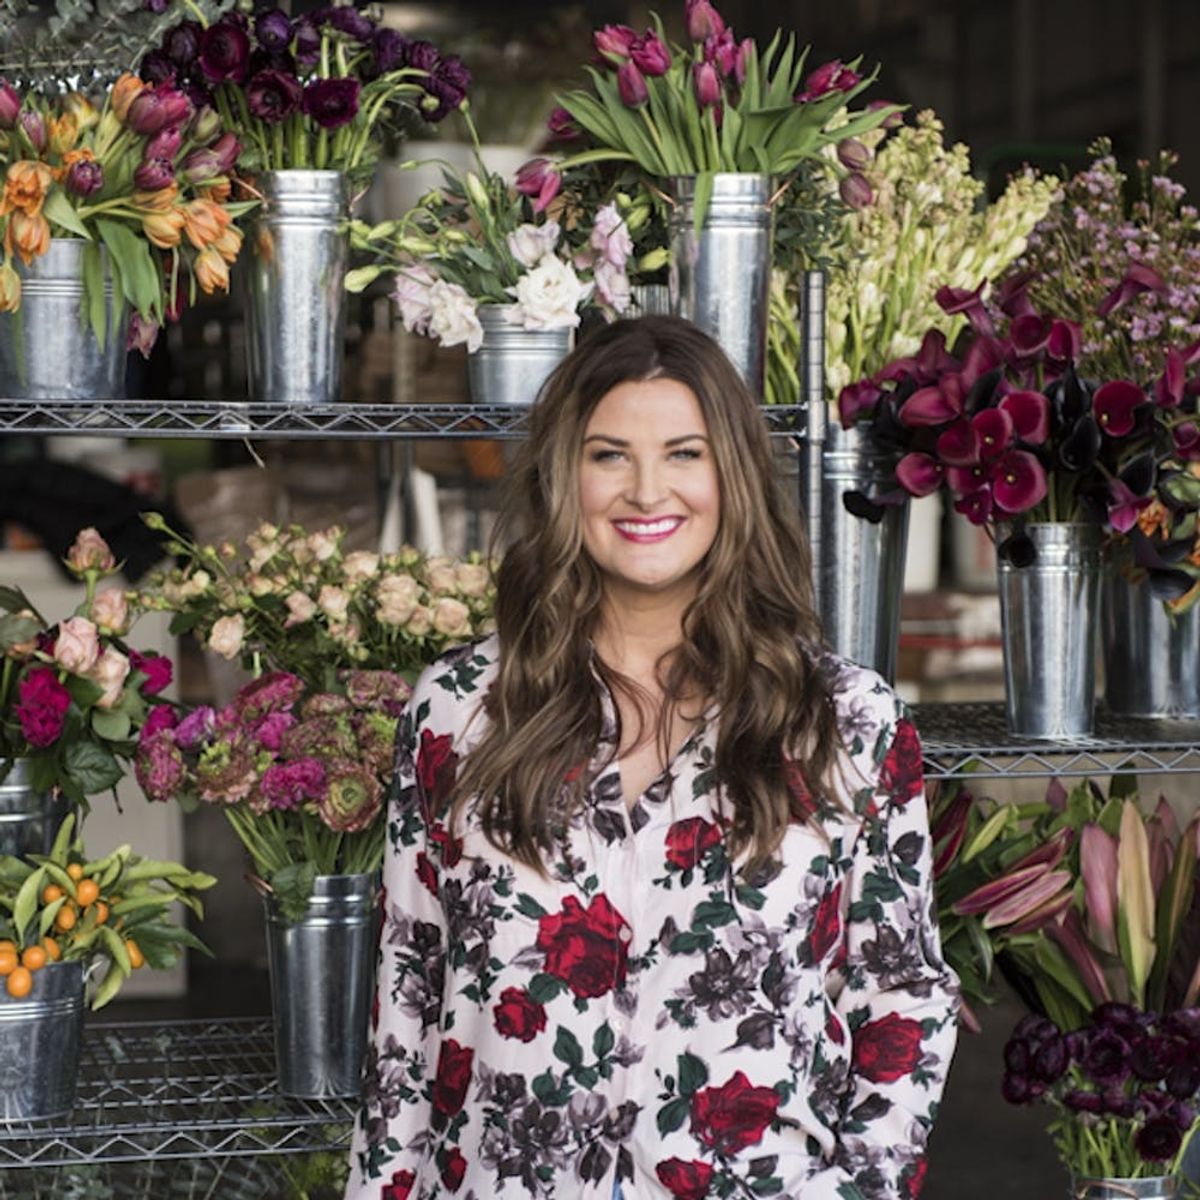 How Farmgirl Flowers Became Everyone’s Go-To Source for Gorgeous Bouquets